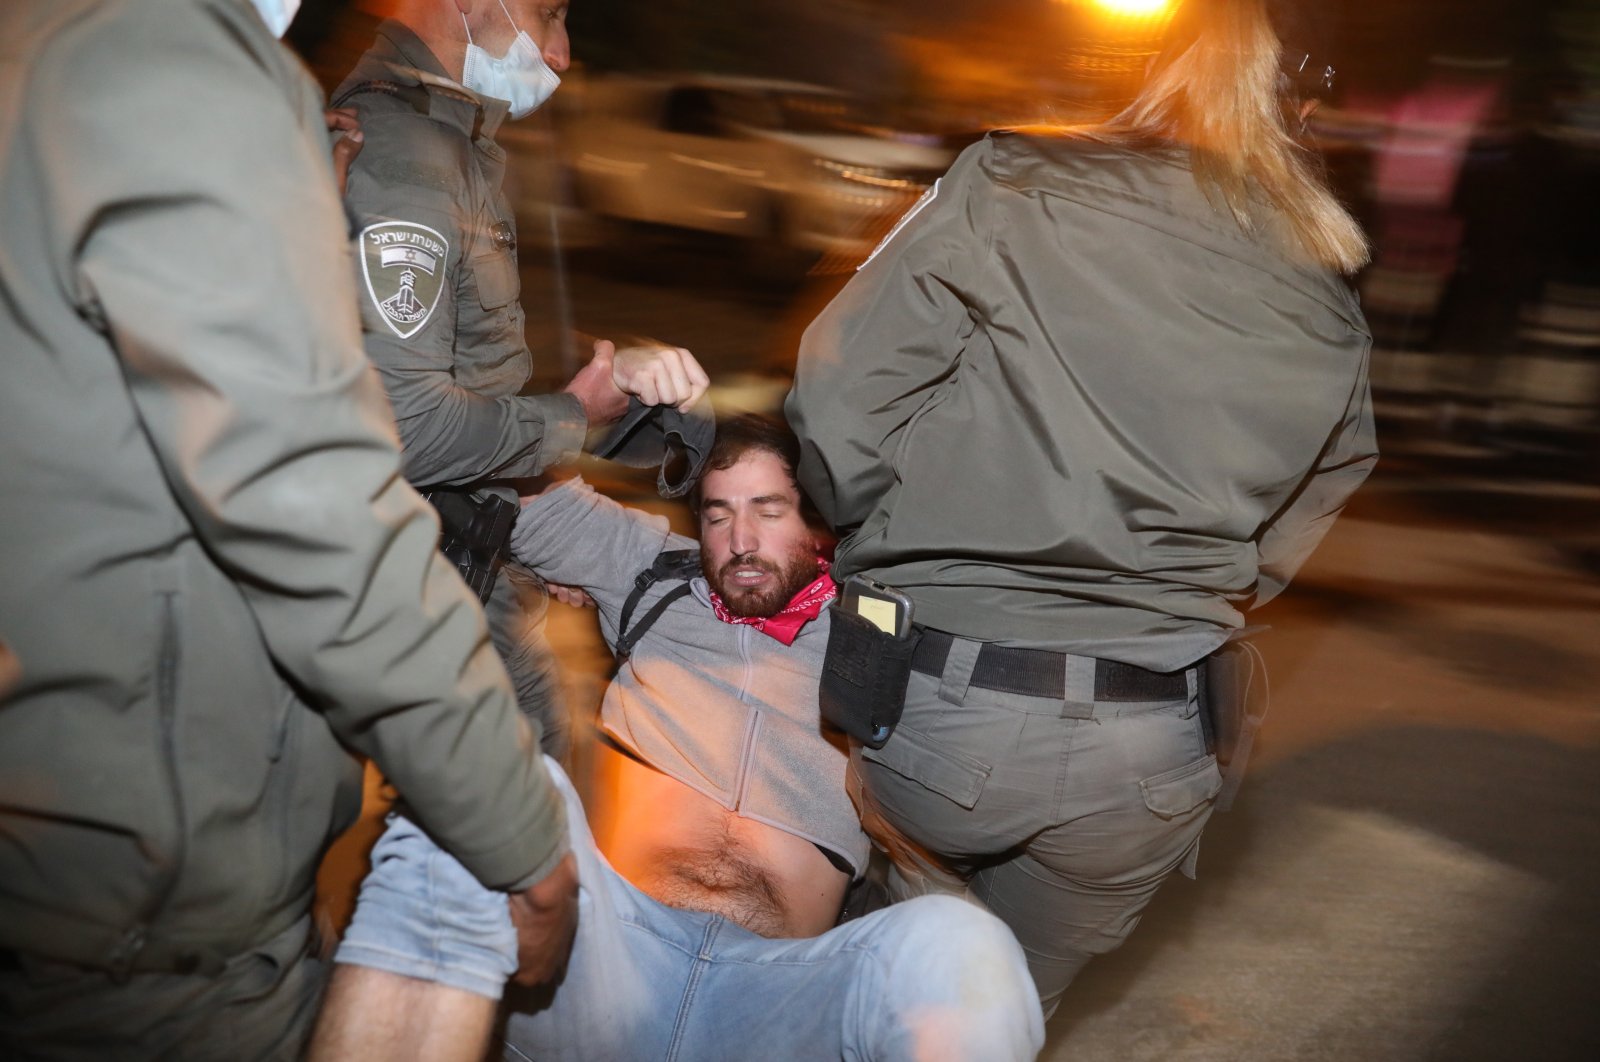 Police arrest an Anti-Netanyahu protester during a rally against the Israeli Prime Minister outside his residence, in Jerusalem, Israel, 05 December 2020. (EPA Photo)